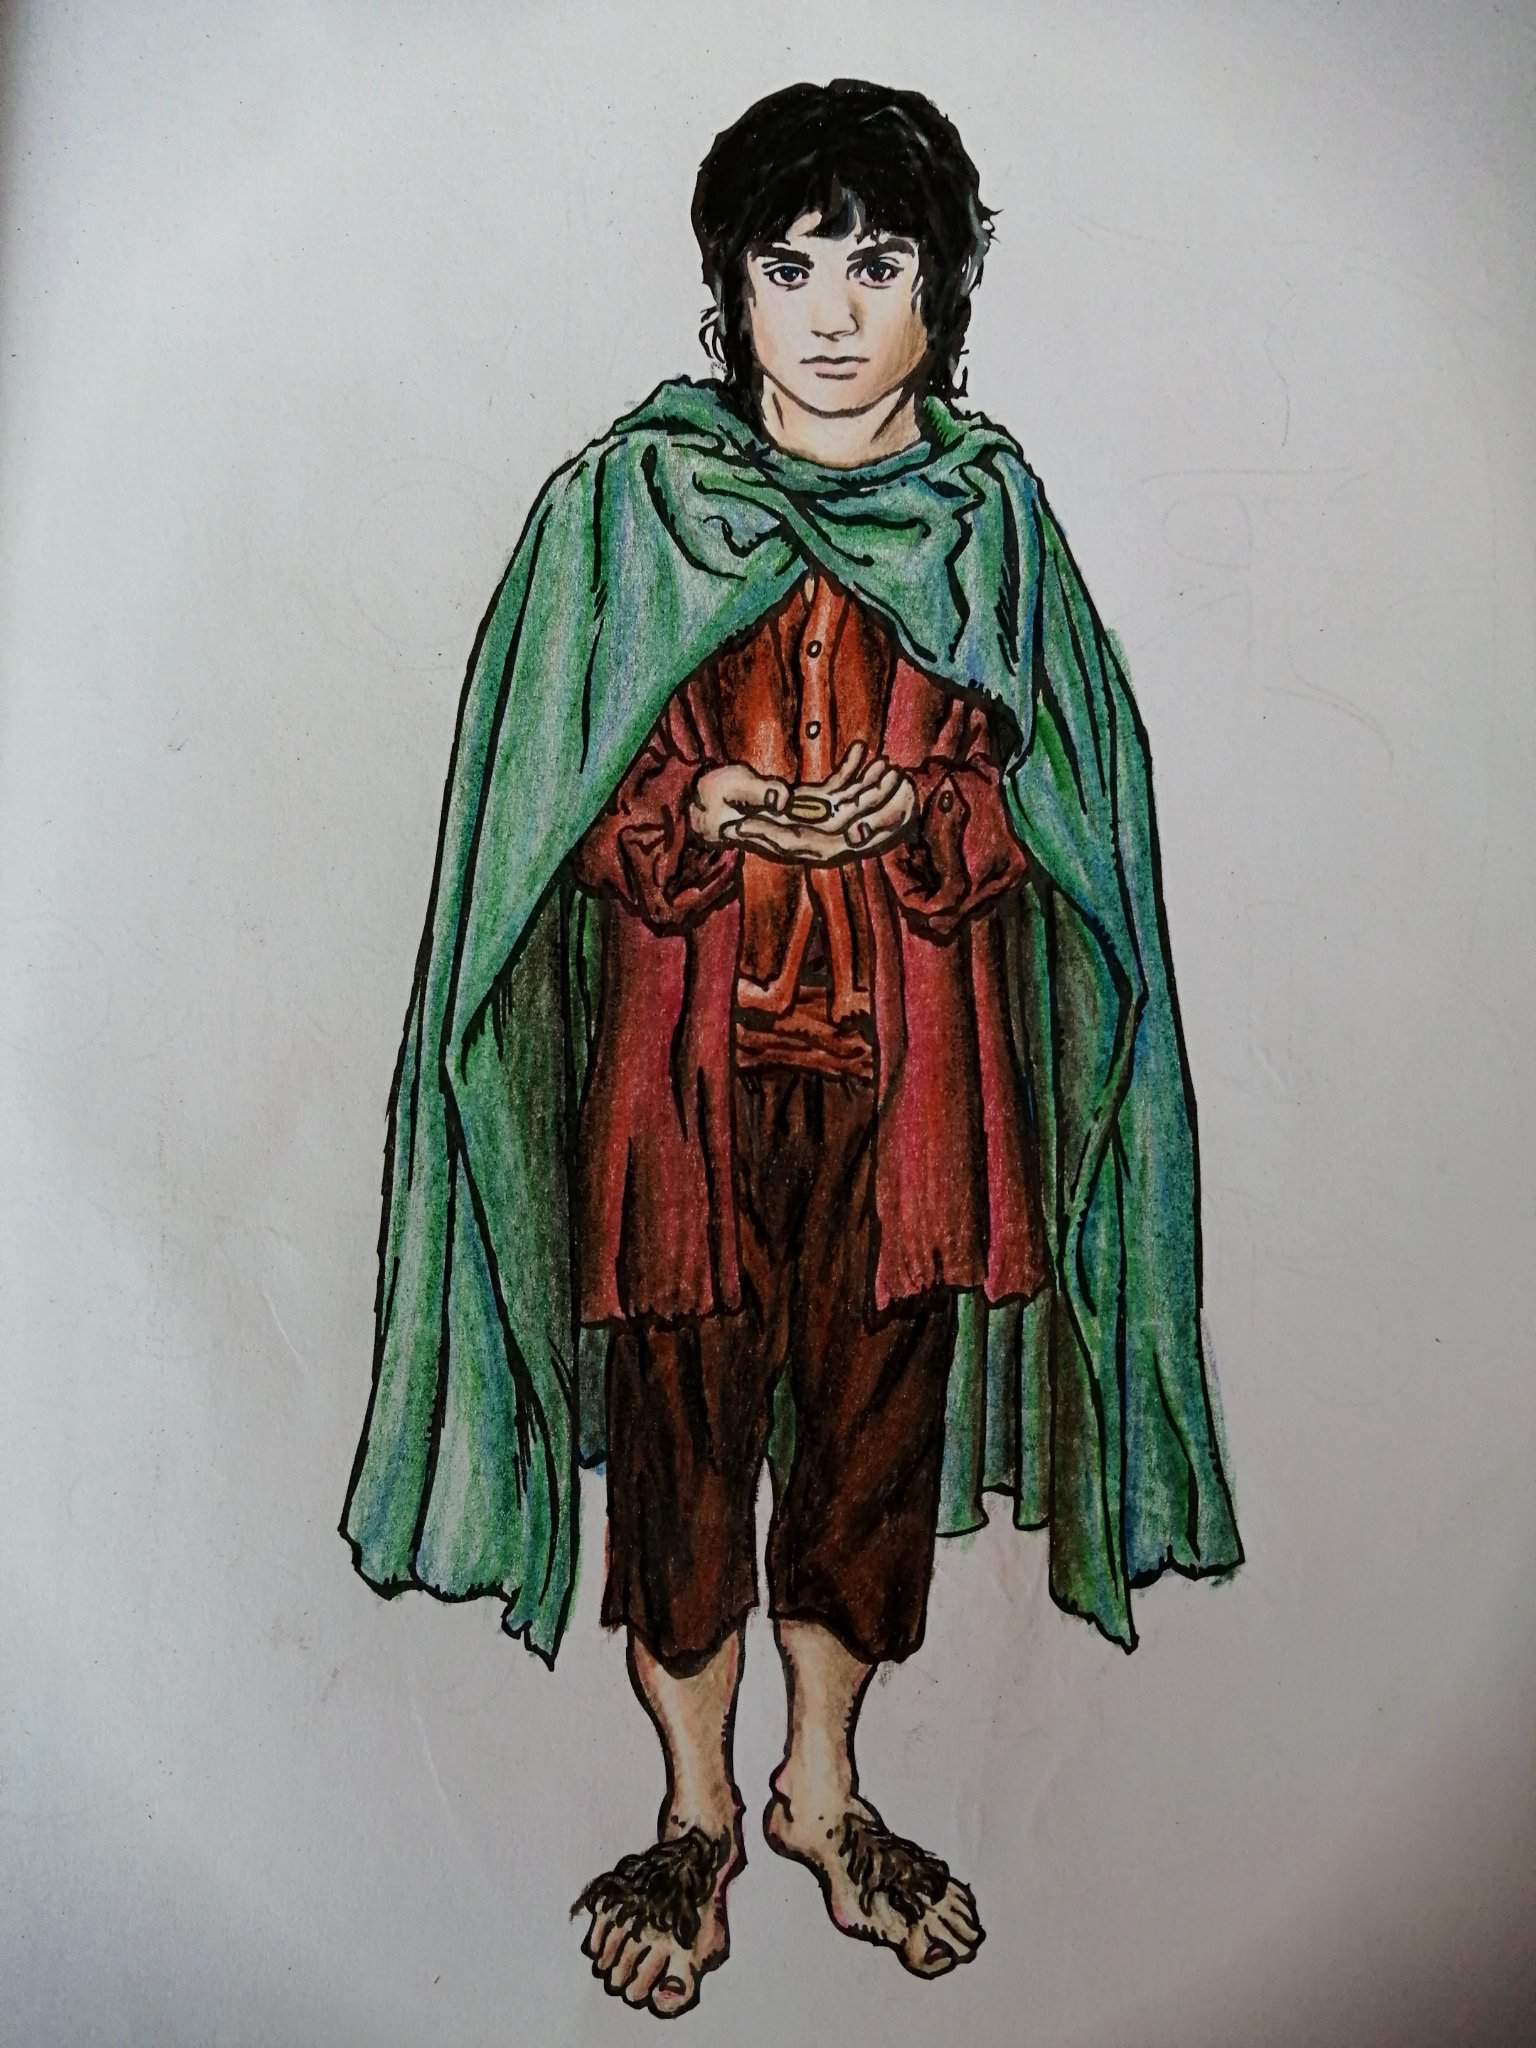 New entry in my lotr coloring book ð lord of the rings amino